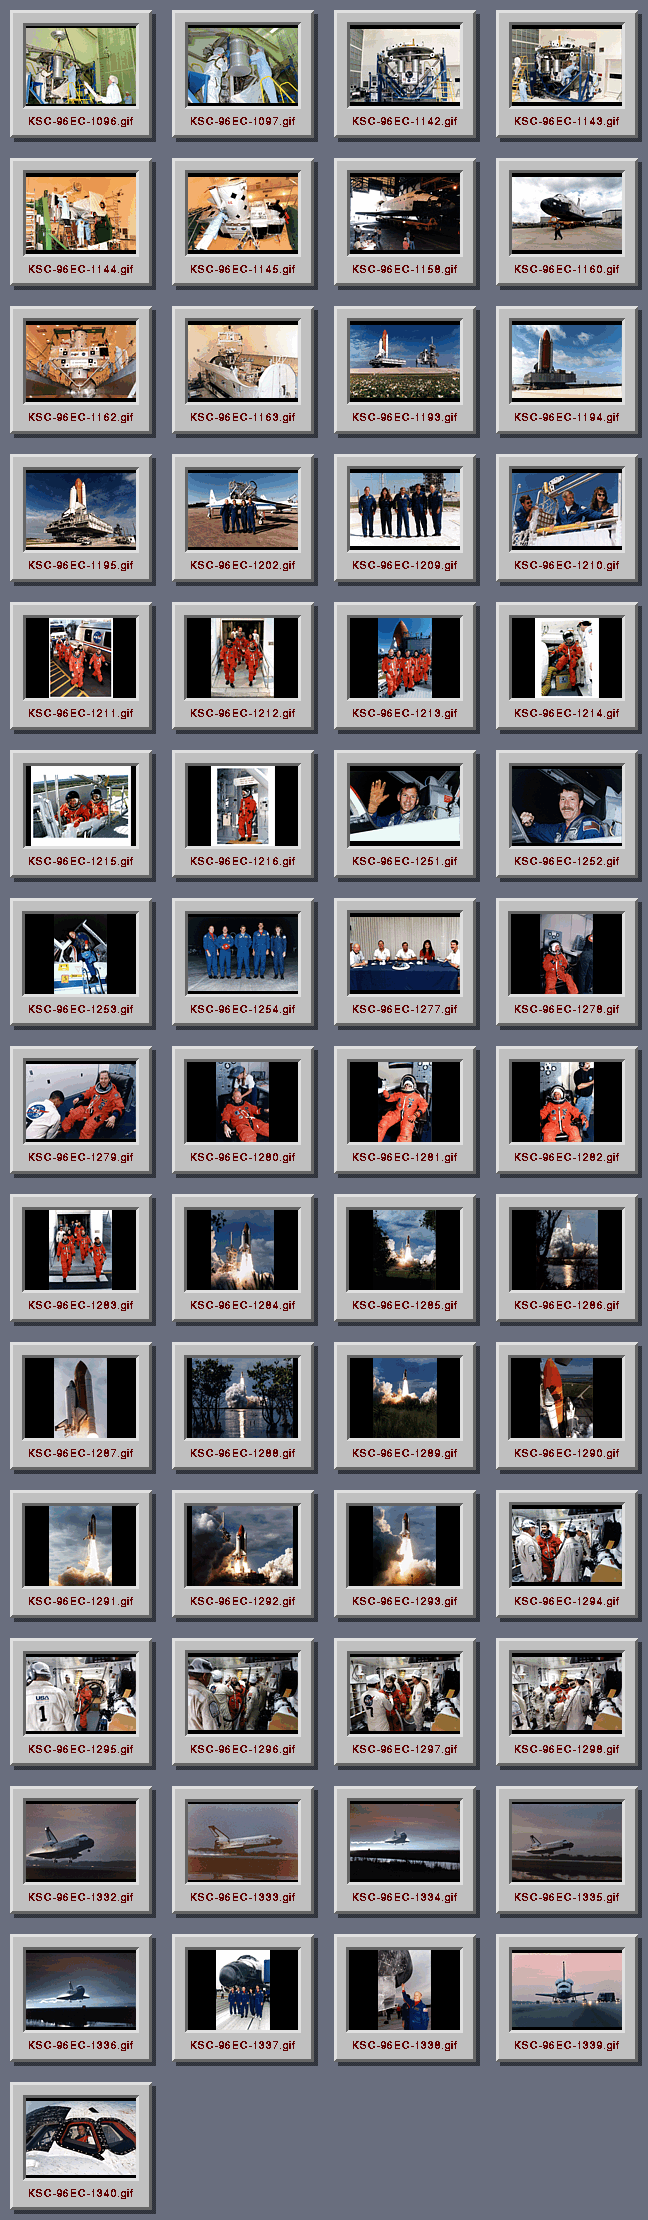 [STS-80 Contact Sheet]